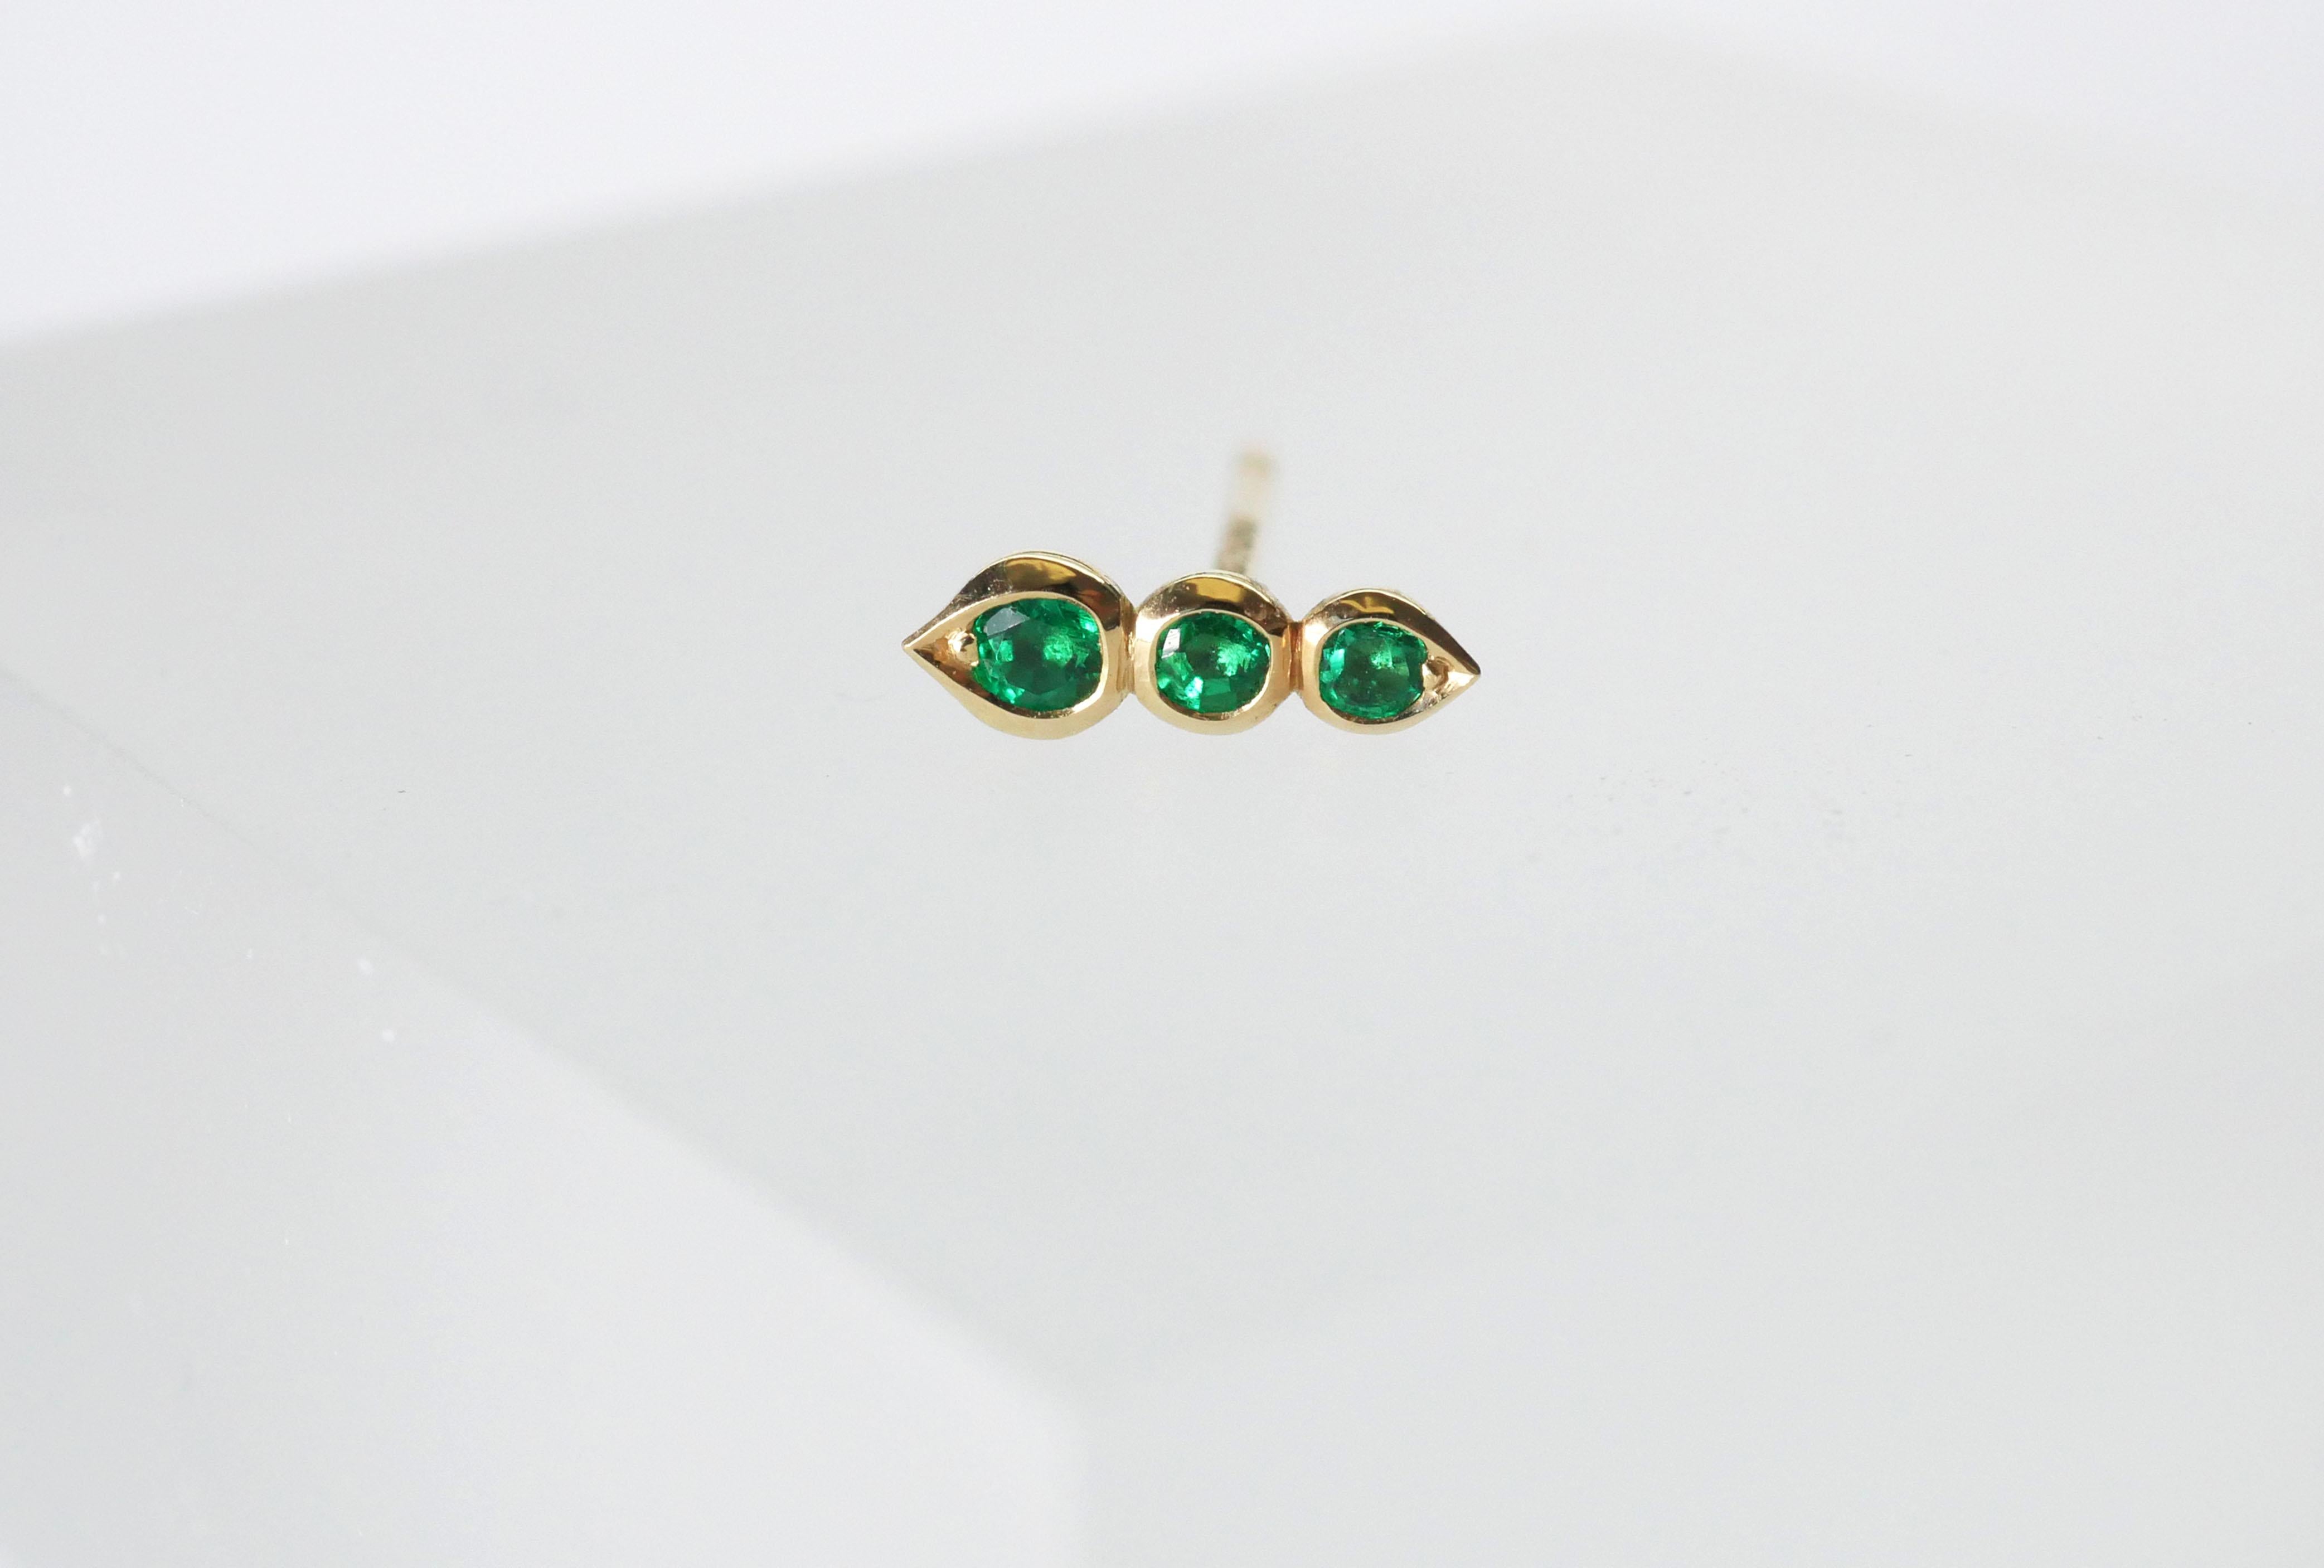 Beautifully hand crafted round emerald single stud earrings in 18k yellow gold. This emerald trio sits in a delicate bezel setting with subtle tear drop shape at each end, and is sold as a single stud earring to be worn solo or stacked.

Total